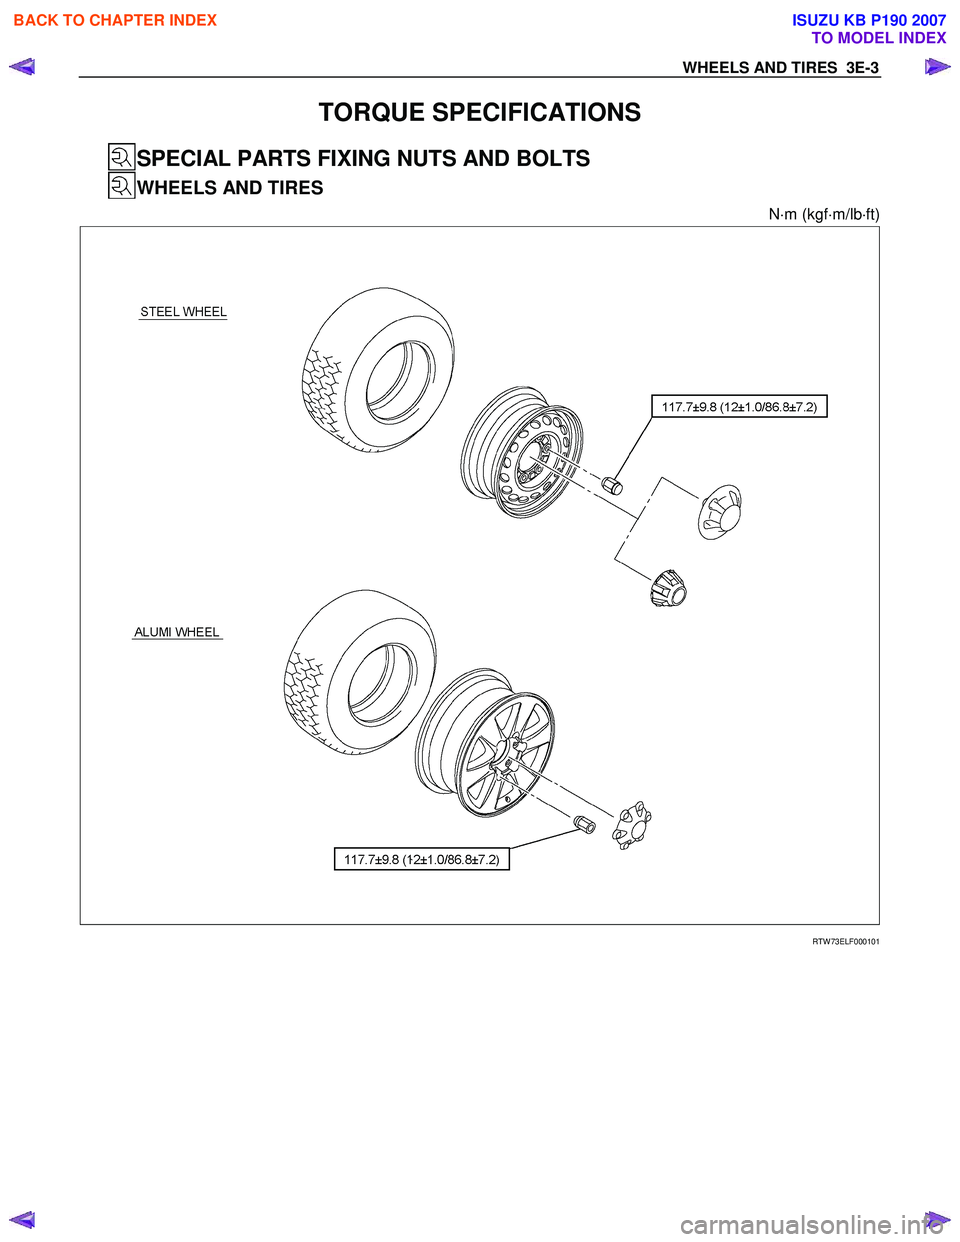 ISUZU KB P190 2007  Workshop User Guide WHEELS AND TIRES  3E-3 
TORQUE SPECIFICATIONS 
 SPECIAL PARTS FIXING NUTS AND BOLTS 
 WHEELS AND TIRES 
N⋅m (kgf ⋅m/lb ⋅ft) 
 
  
  
 
 
 
RTW 73ELF000101 
  
 
 
BACK TO CHAPTER INDEX
TO MODEL 